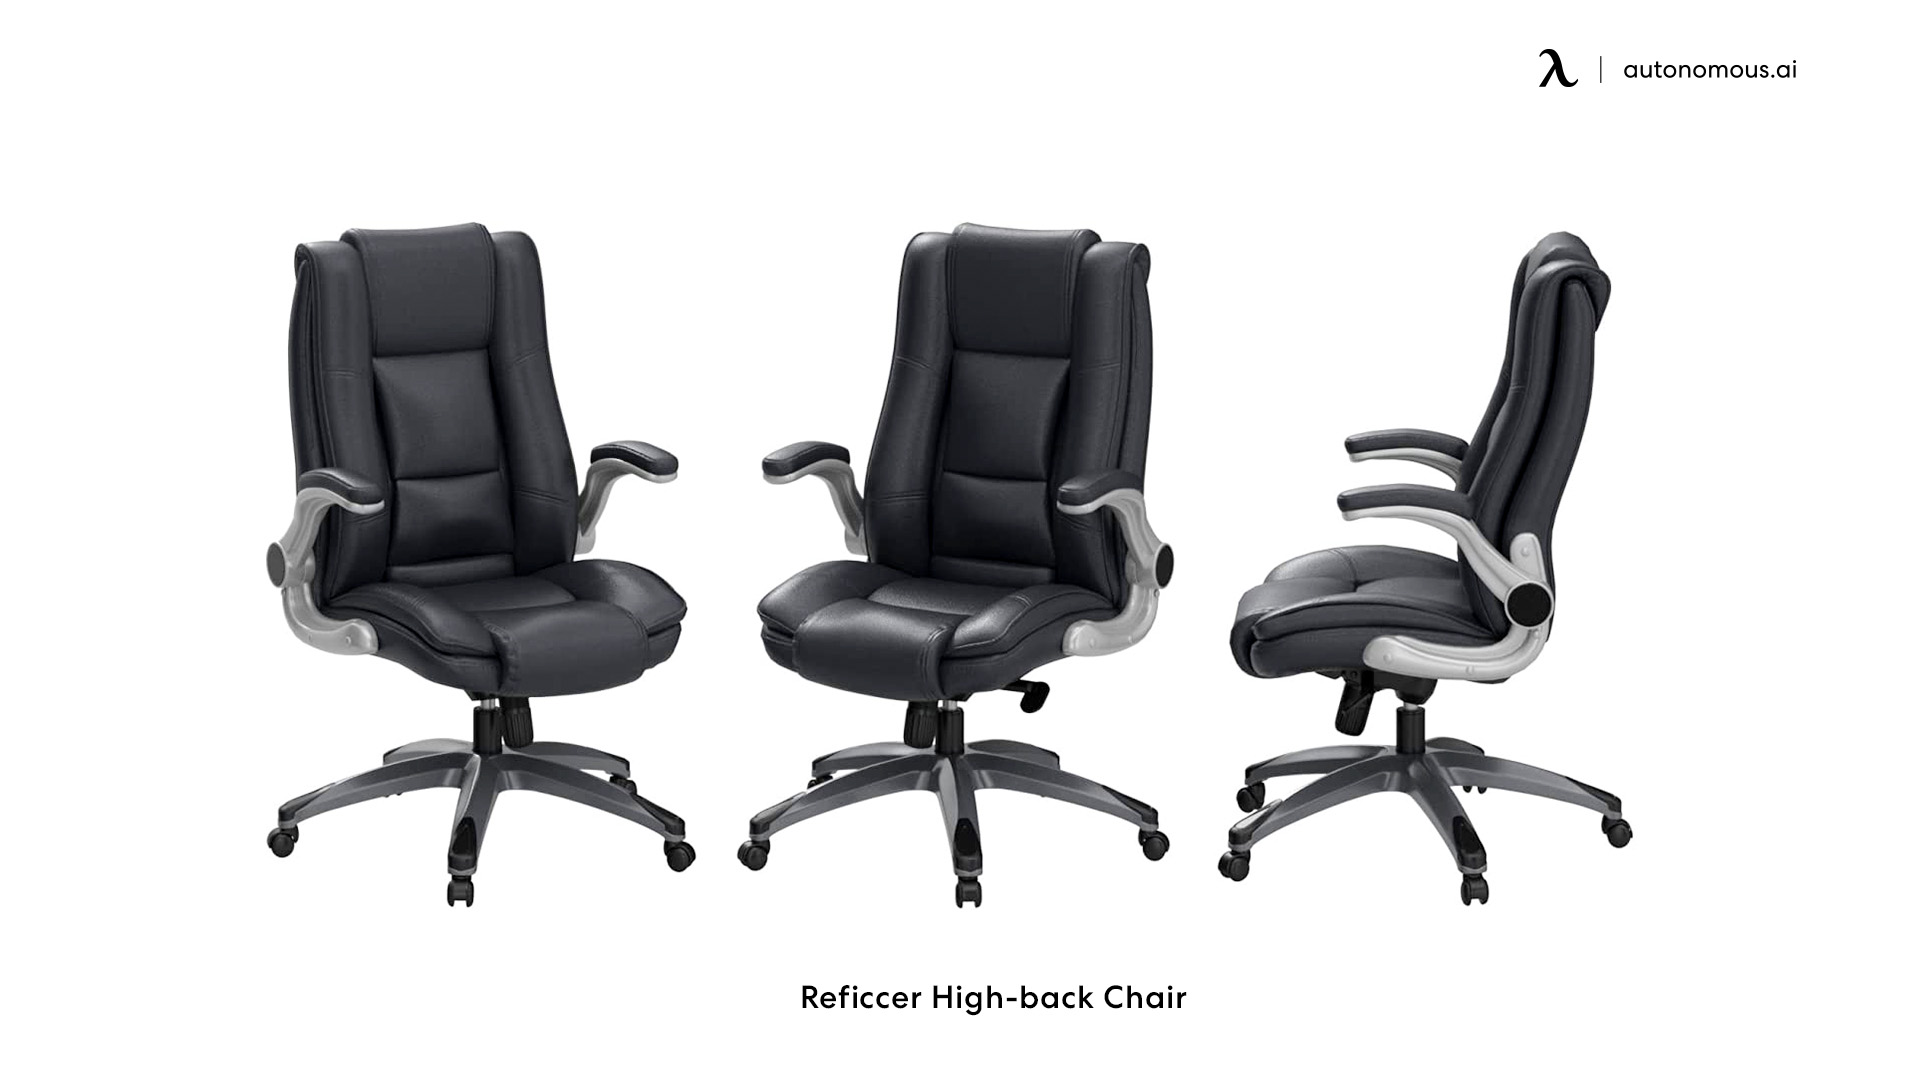 Reficcer High-back sturdy office chairs